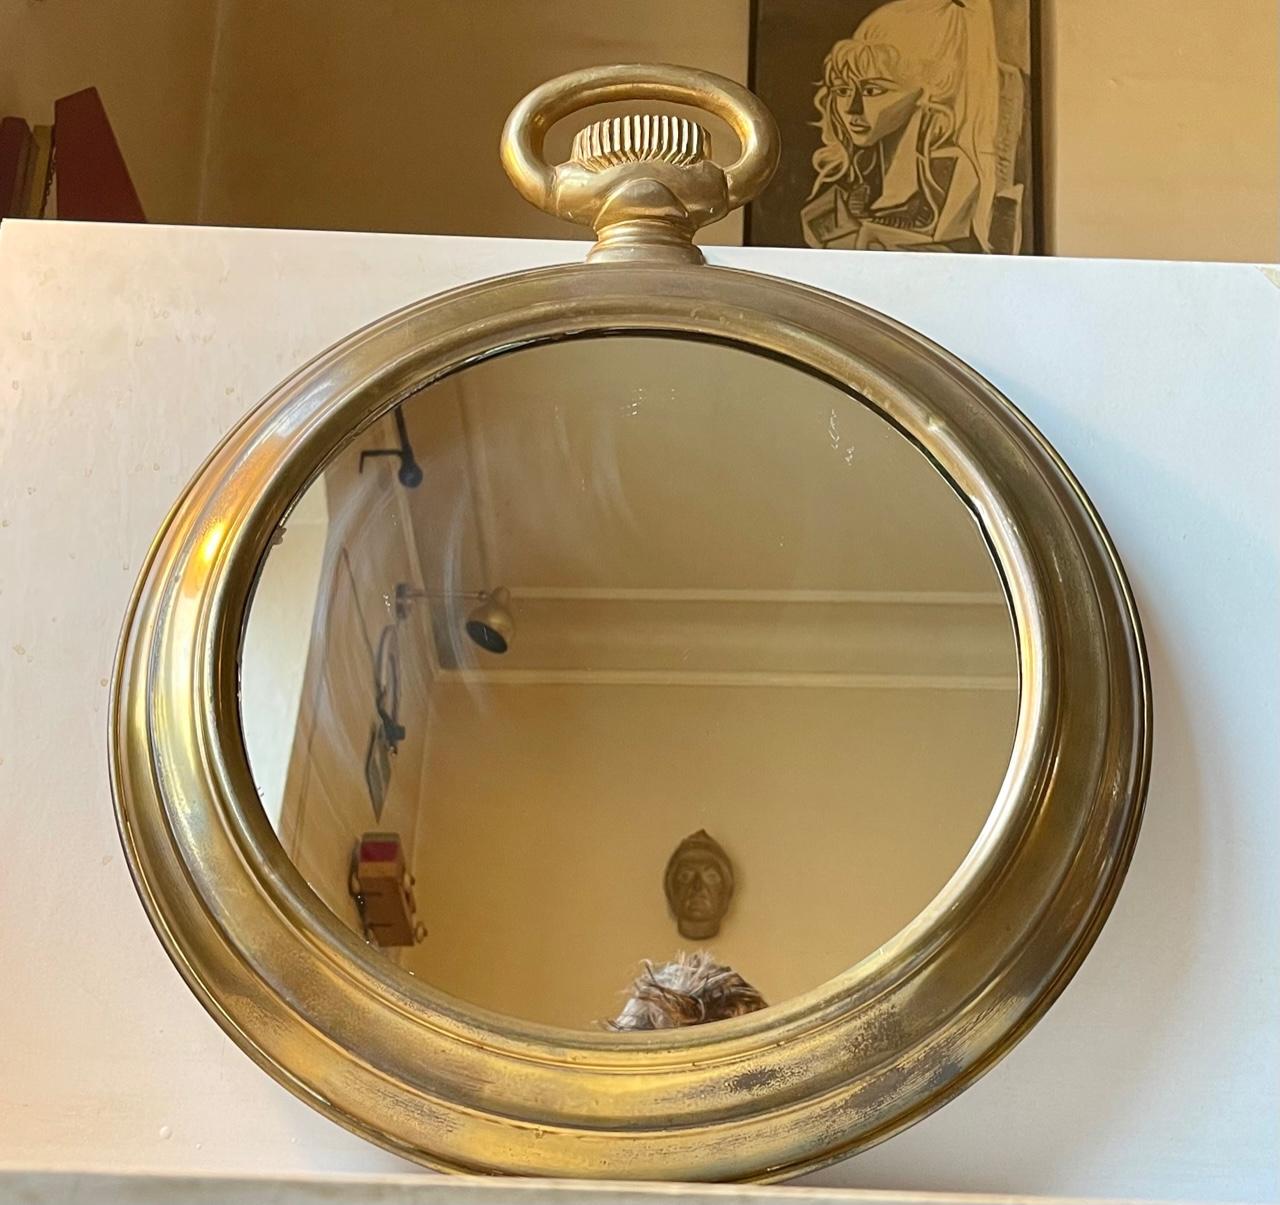 A round brass pocket watch mirror made in France during the 1950s. Its frame is made from solid brass that has developed a Natural patina. Its suitable for bathrooms, small alcoves or in your entrance reception area. Dimensions: 49 W x 63 H x 6.5 D